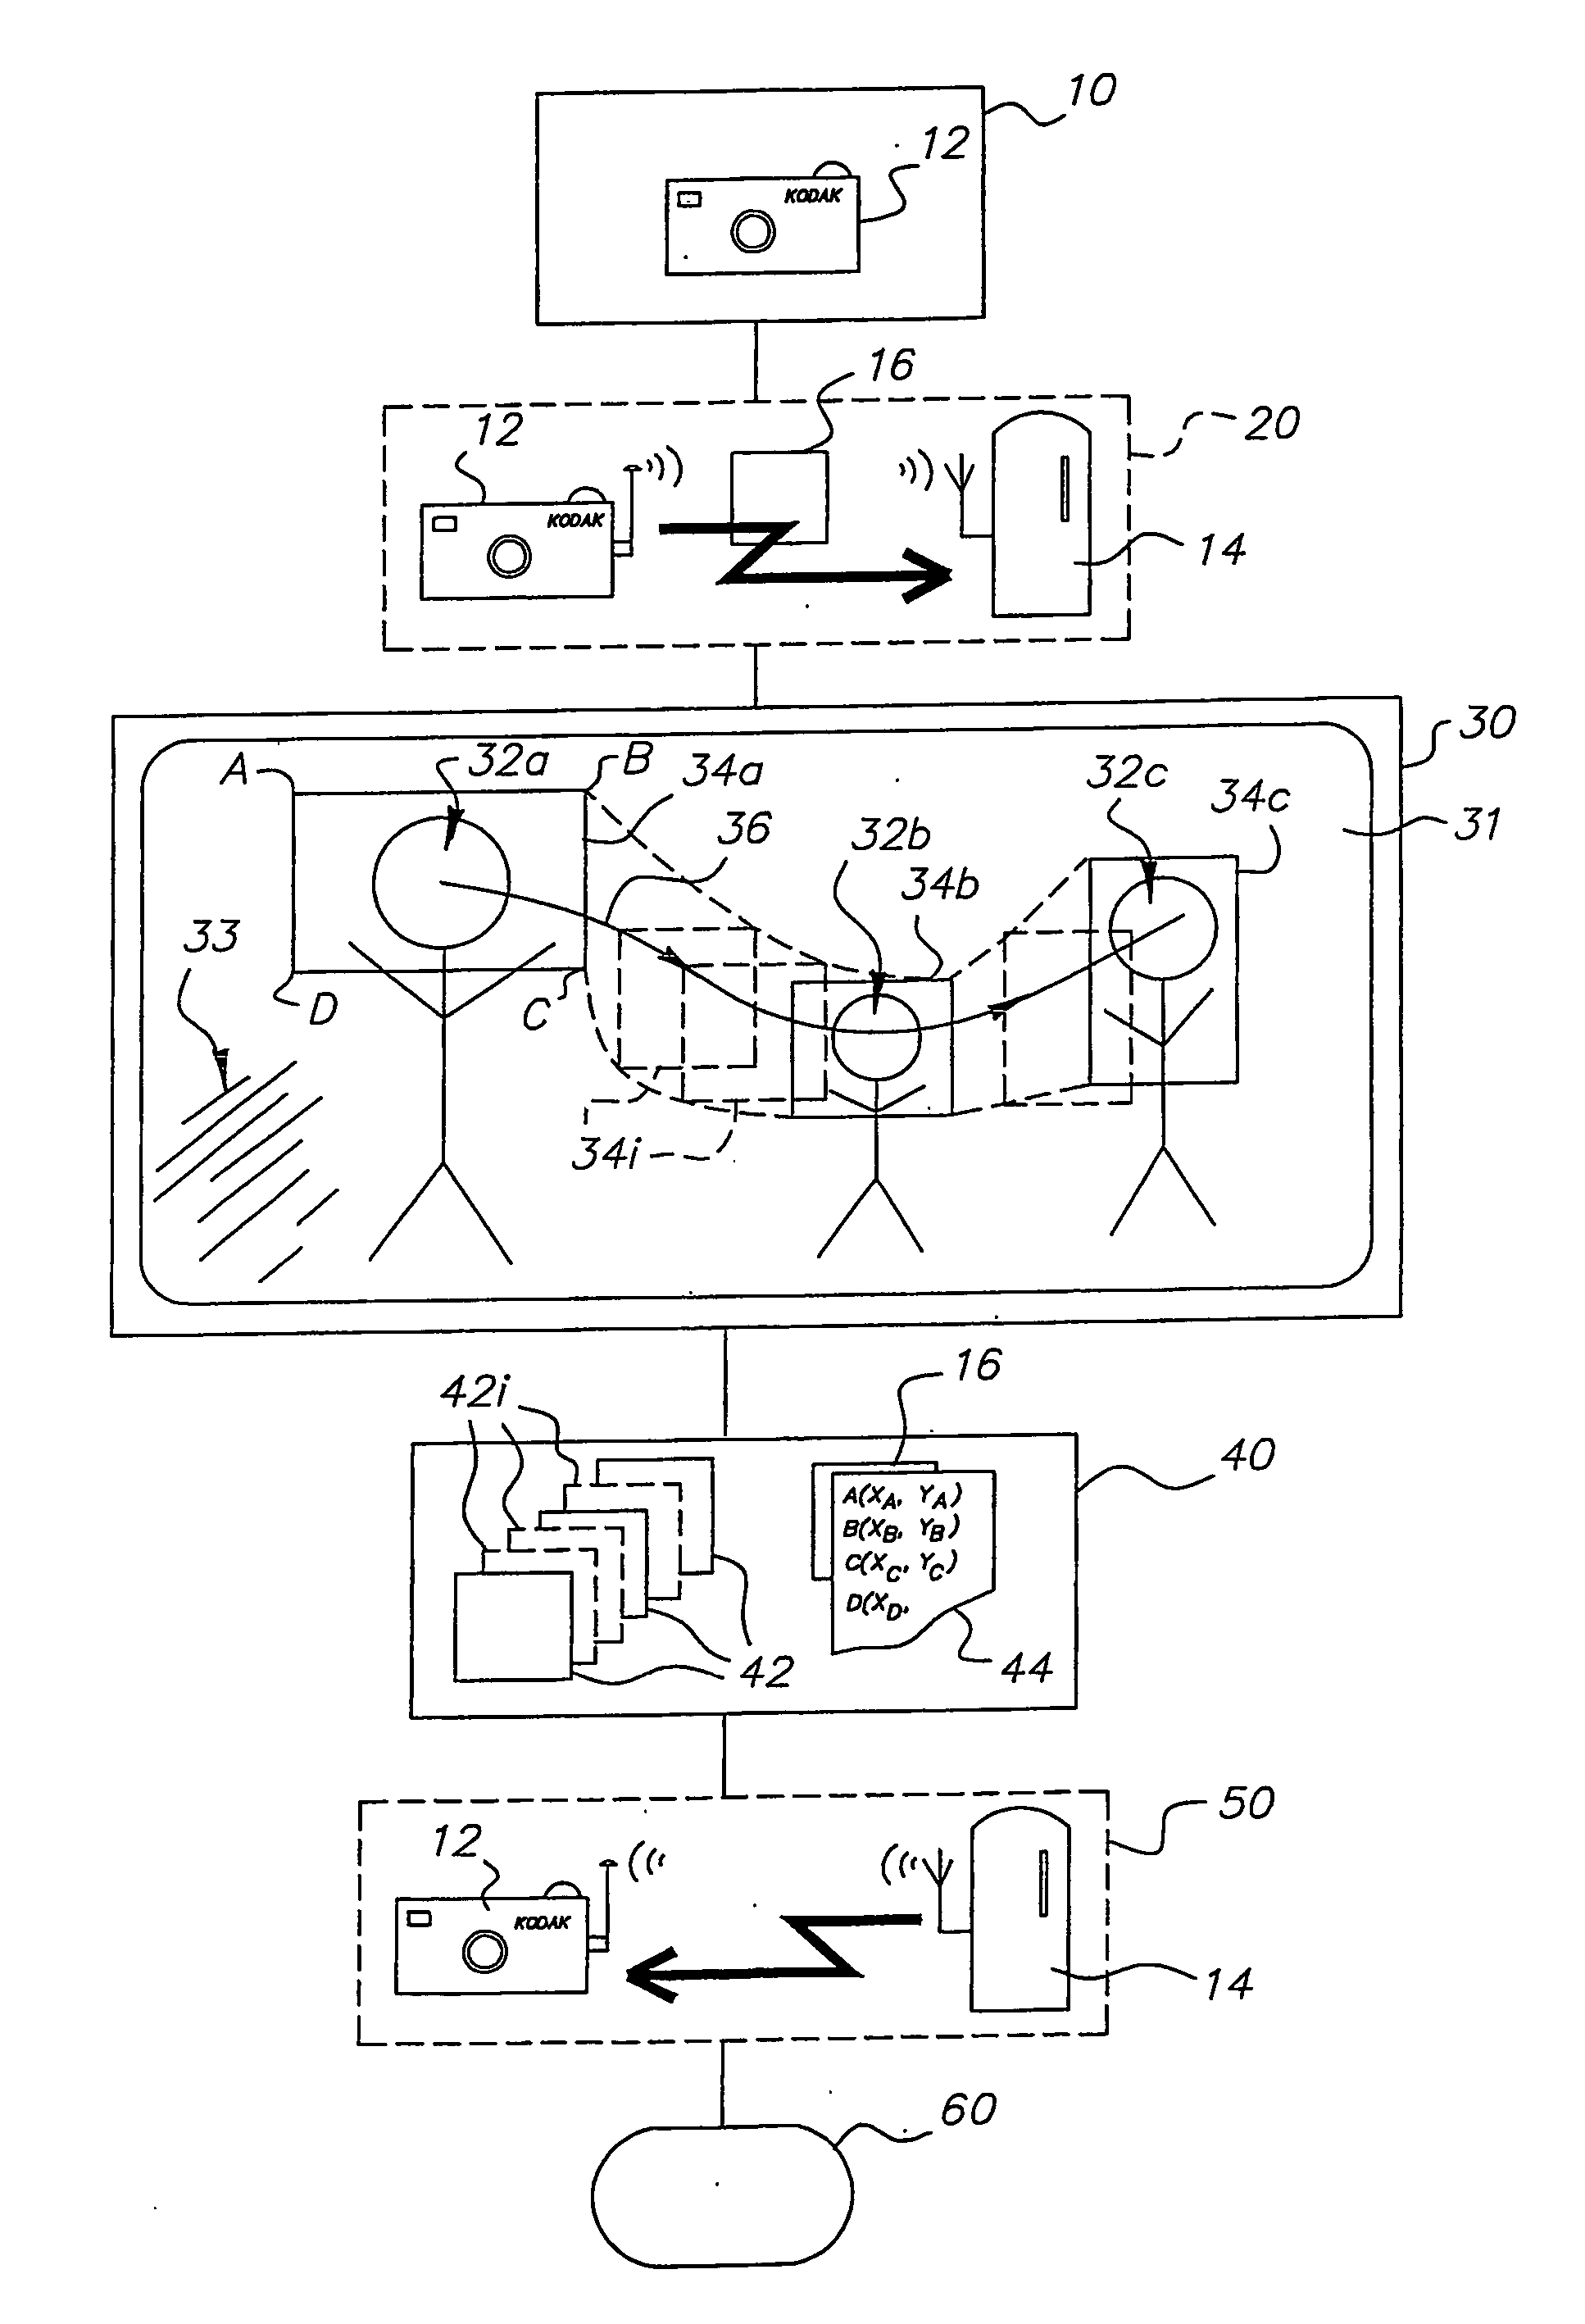 Method of displaying an image captured by a digital